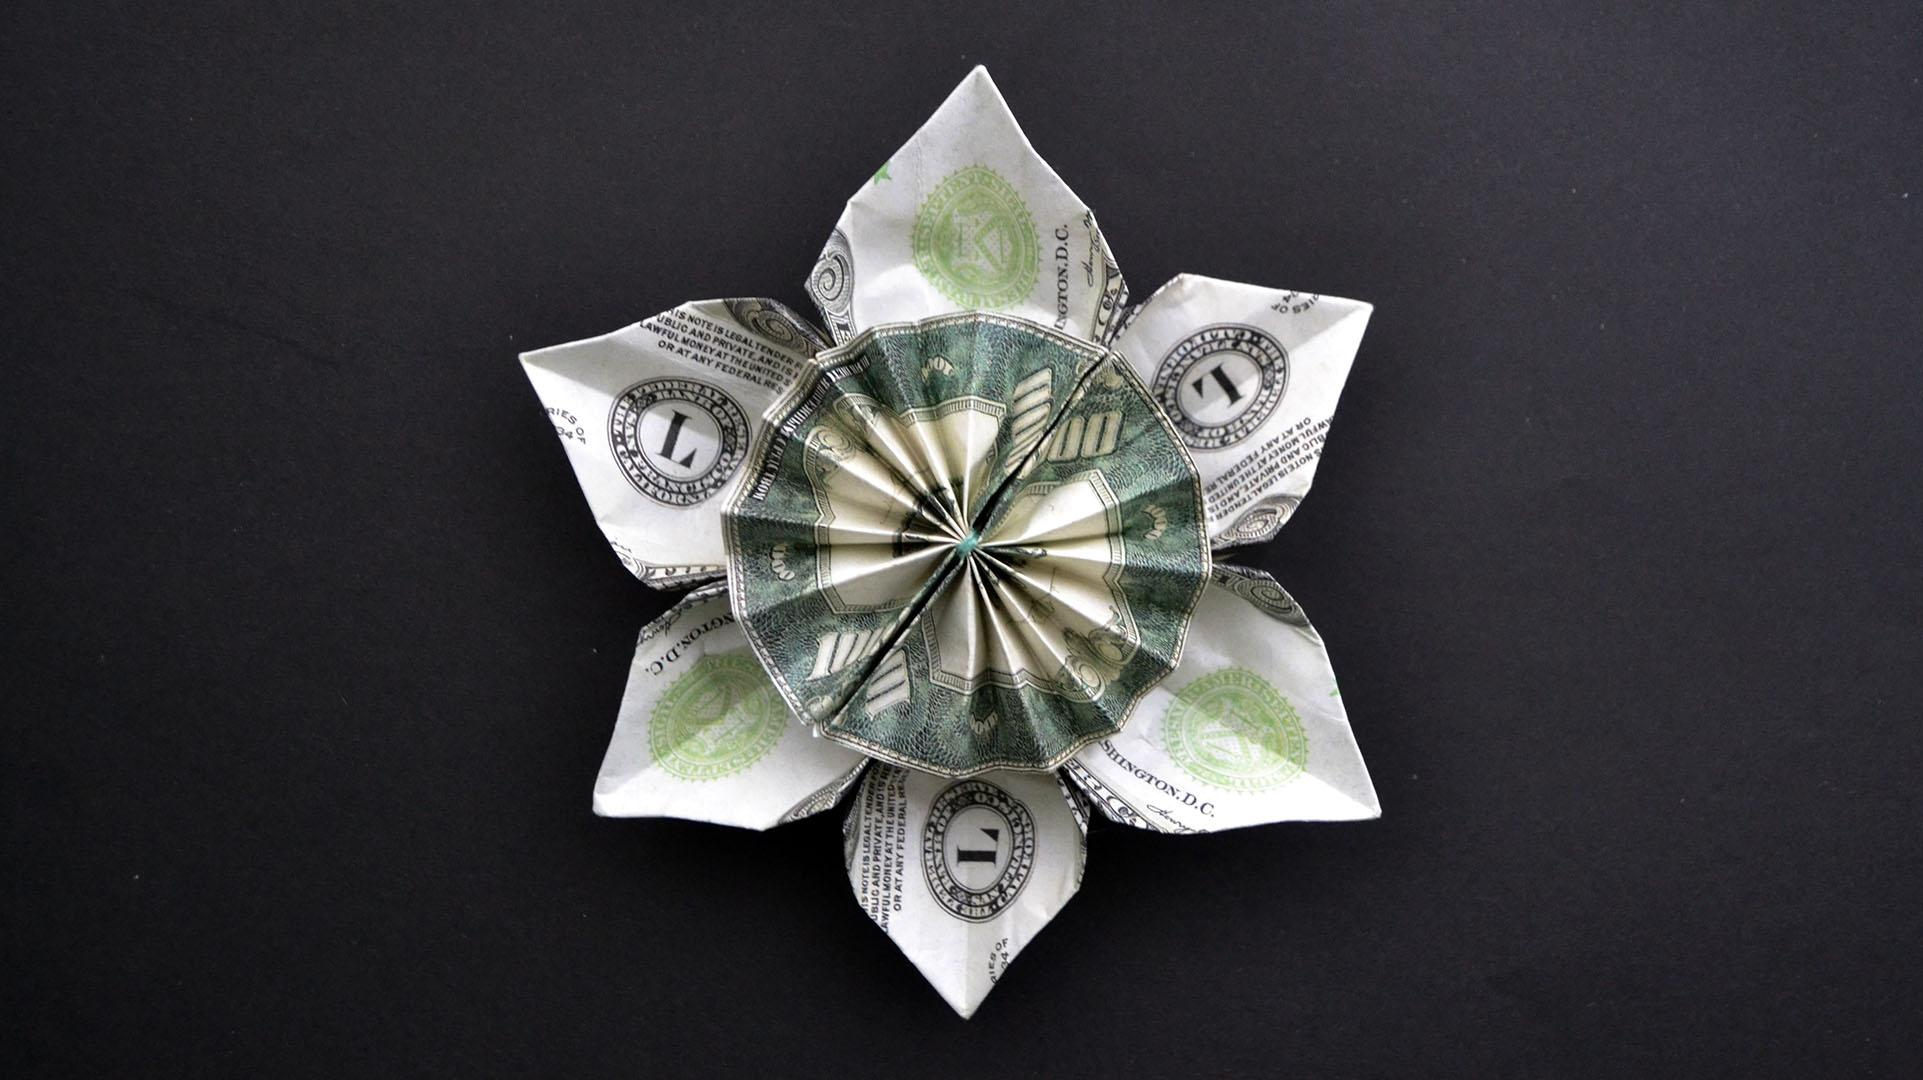 How To Make An Origami Rose Out Of Money Beautiful Money Flower Lei Modular Origami For Graduation Dollar